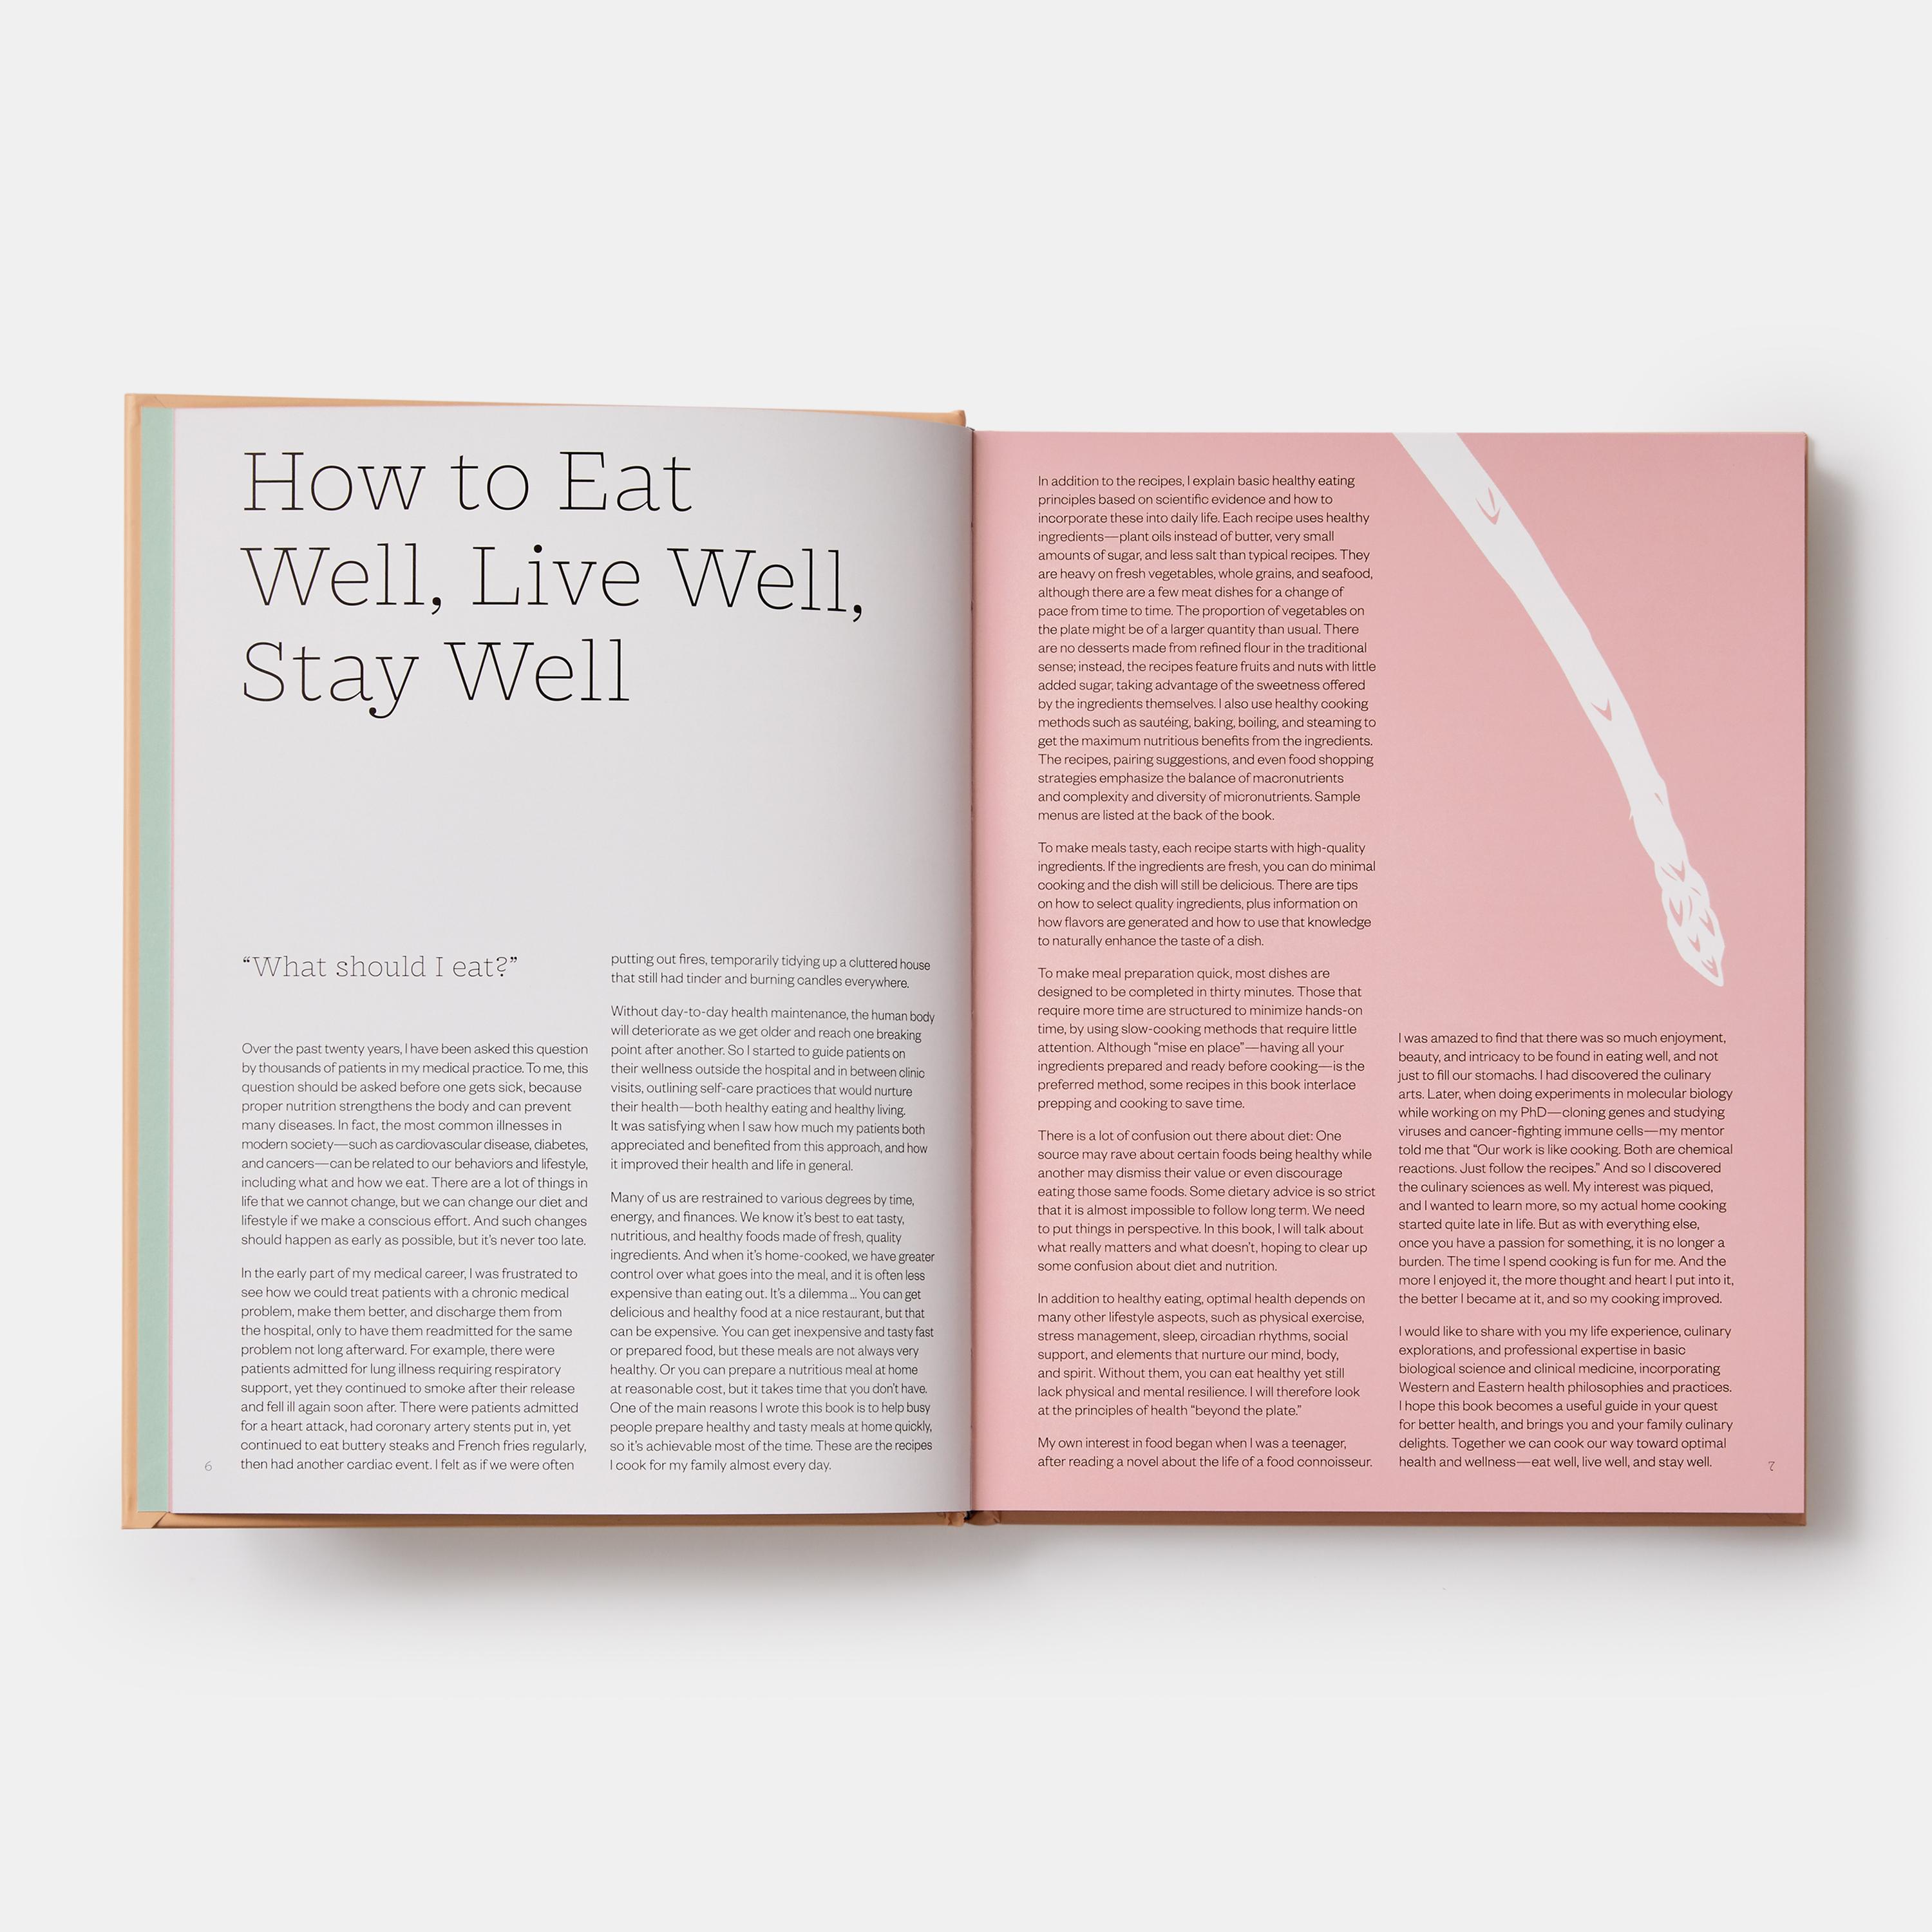 From a world-renowned and beloved doctor, an accessible guide with 100 delicious tried-and-tested recipes for healthy living - to eat well, live well and stay well

For the first time, Gary Deng MD, Ph.D. presents to a general readership his